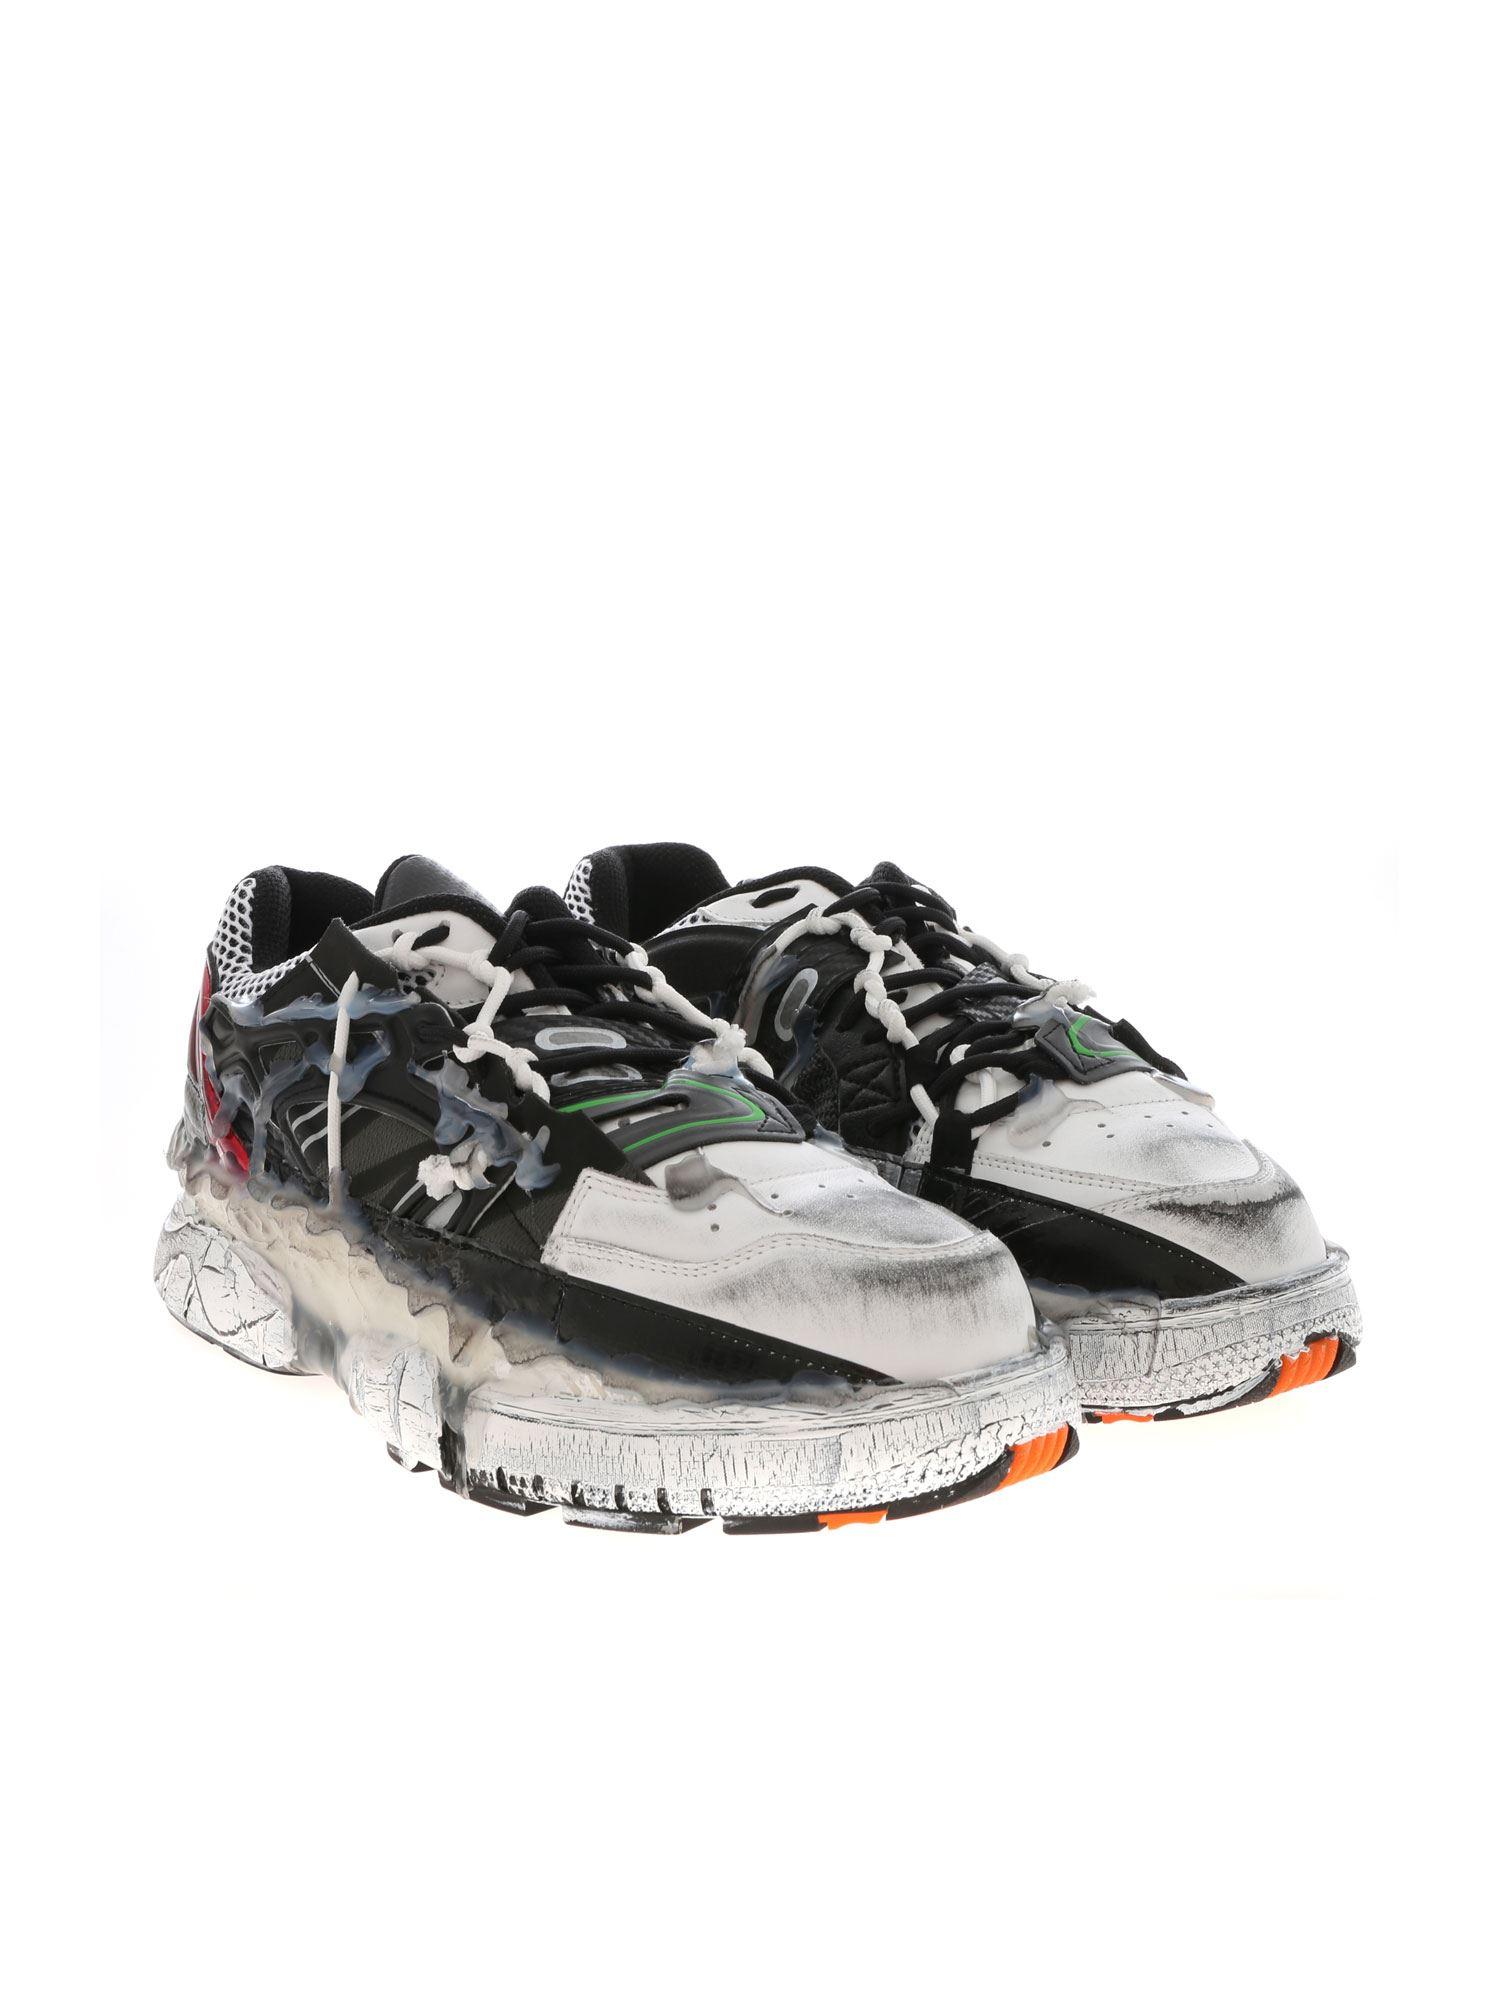 Maison Margiela Fusion Leather And Mesh Trainers for Men - Lyst